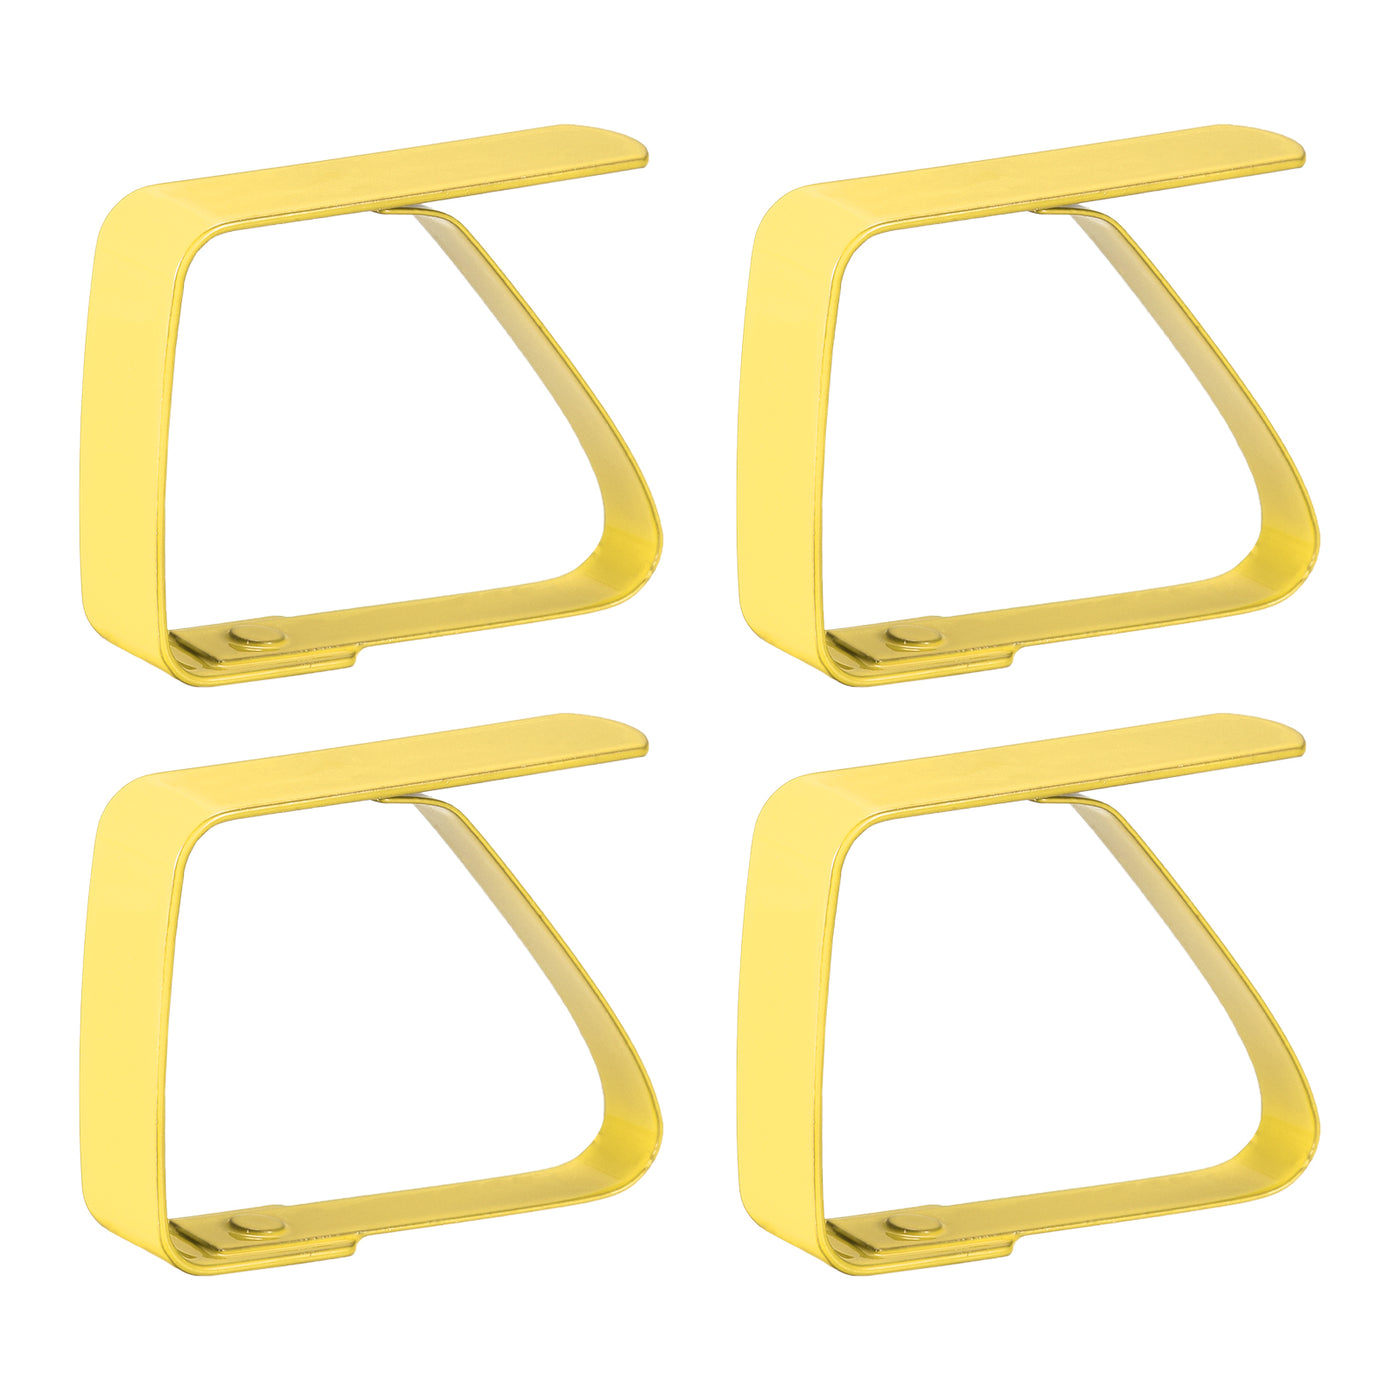 uxcell Uxcell Tablecloth Clips 50mm x 40mm 420 Stainless Steel Table Cloth Holder Yellow 4 Pcs